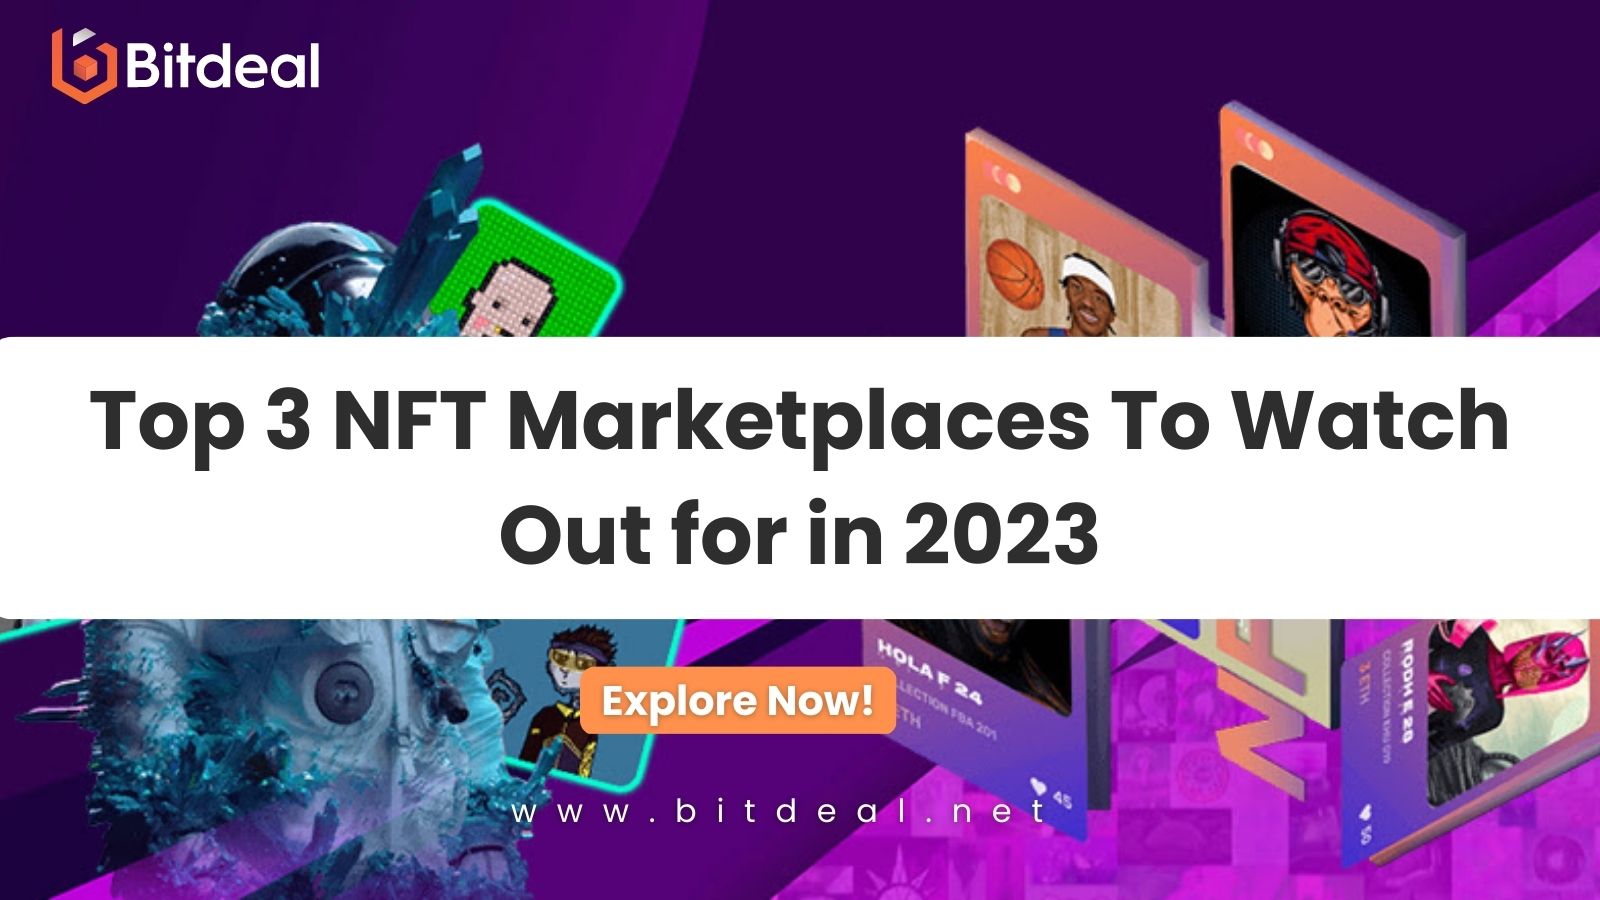 Top 3 NFT Marketplaces To Watch Out for in 2023